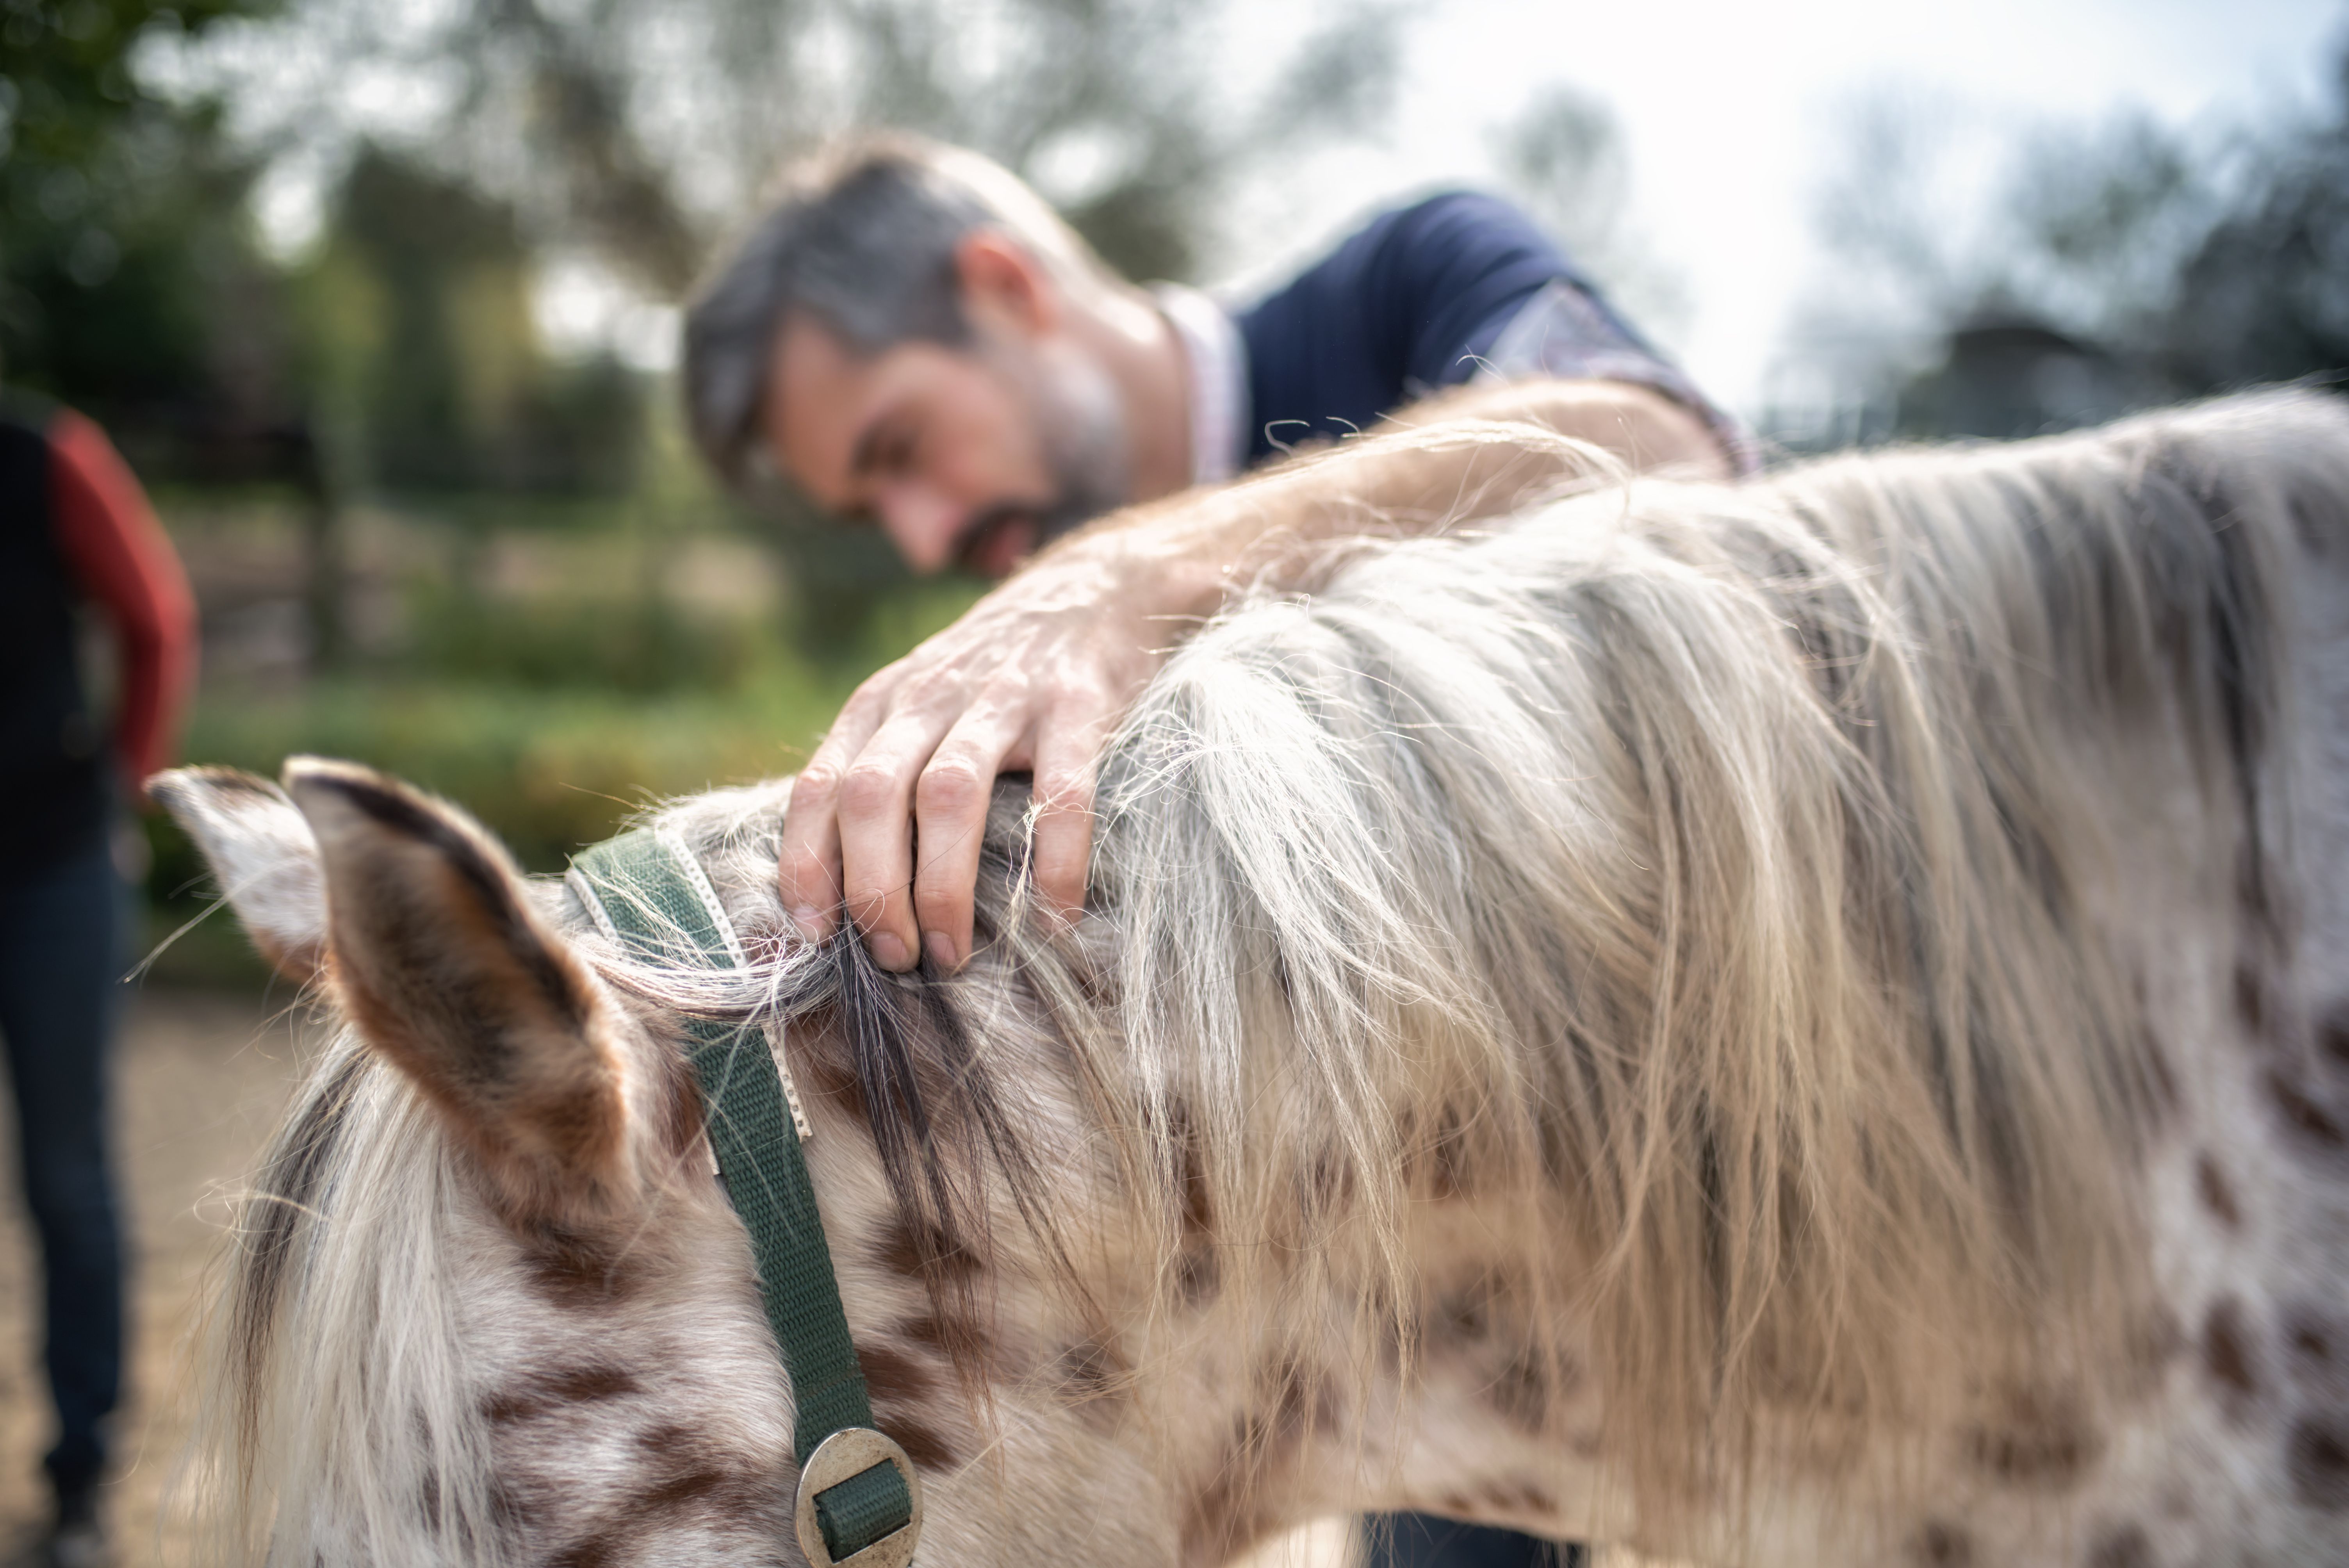 Veterinarian gripping neck of spotted horse